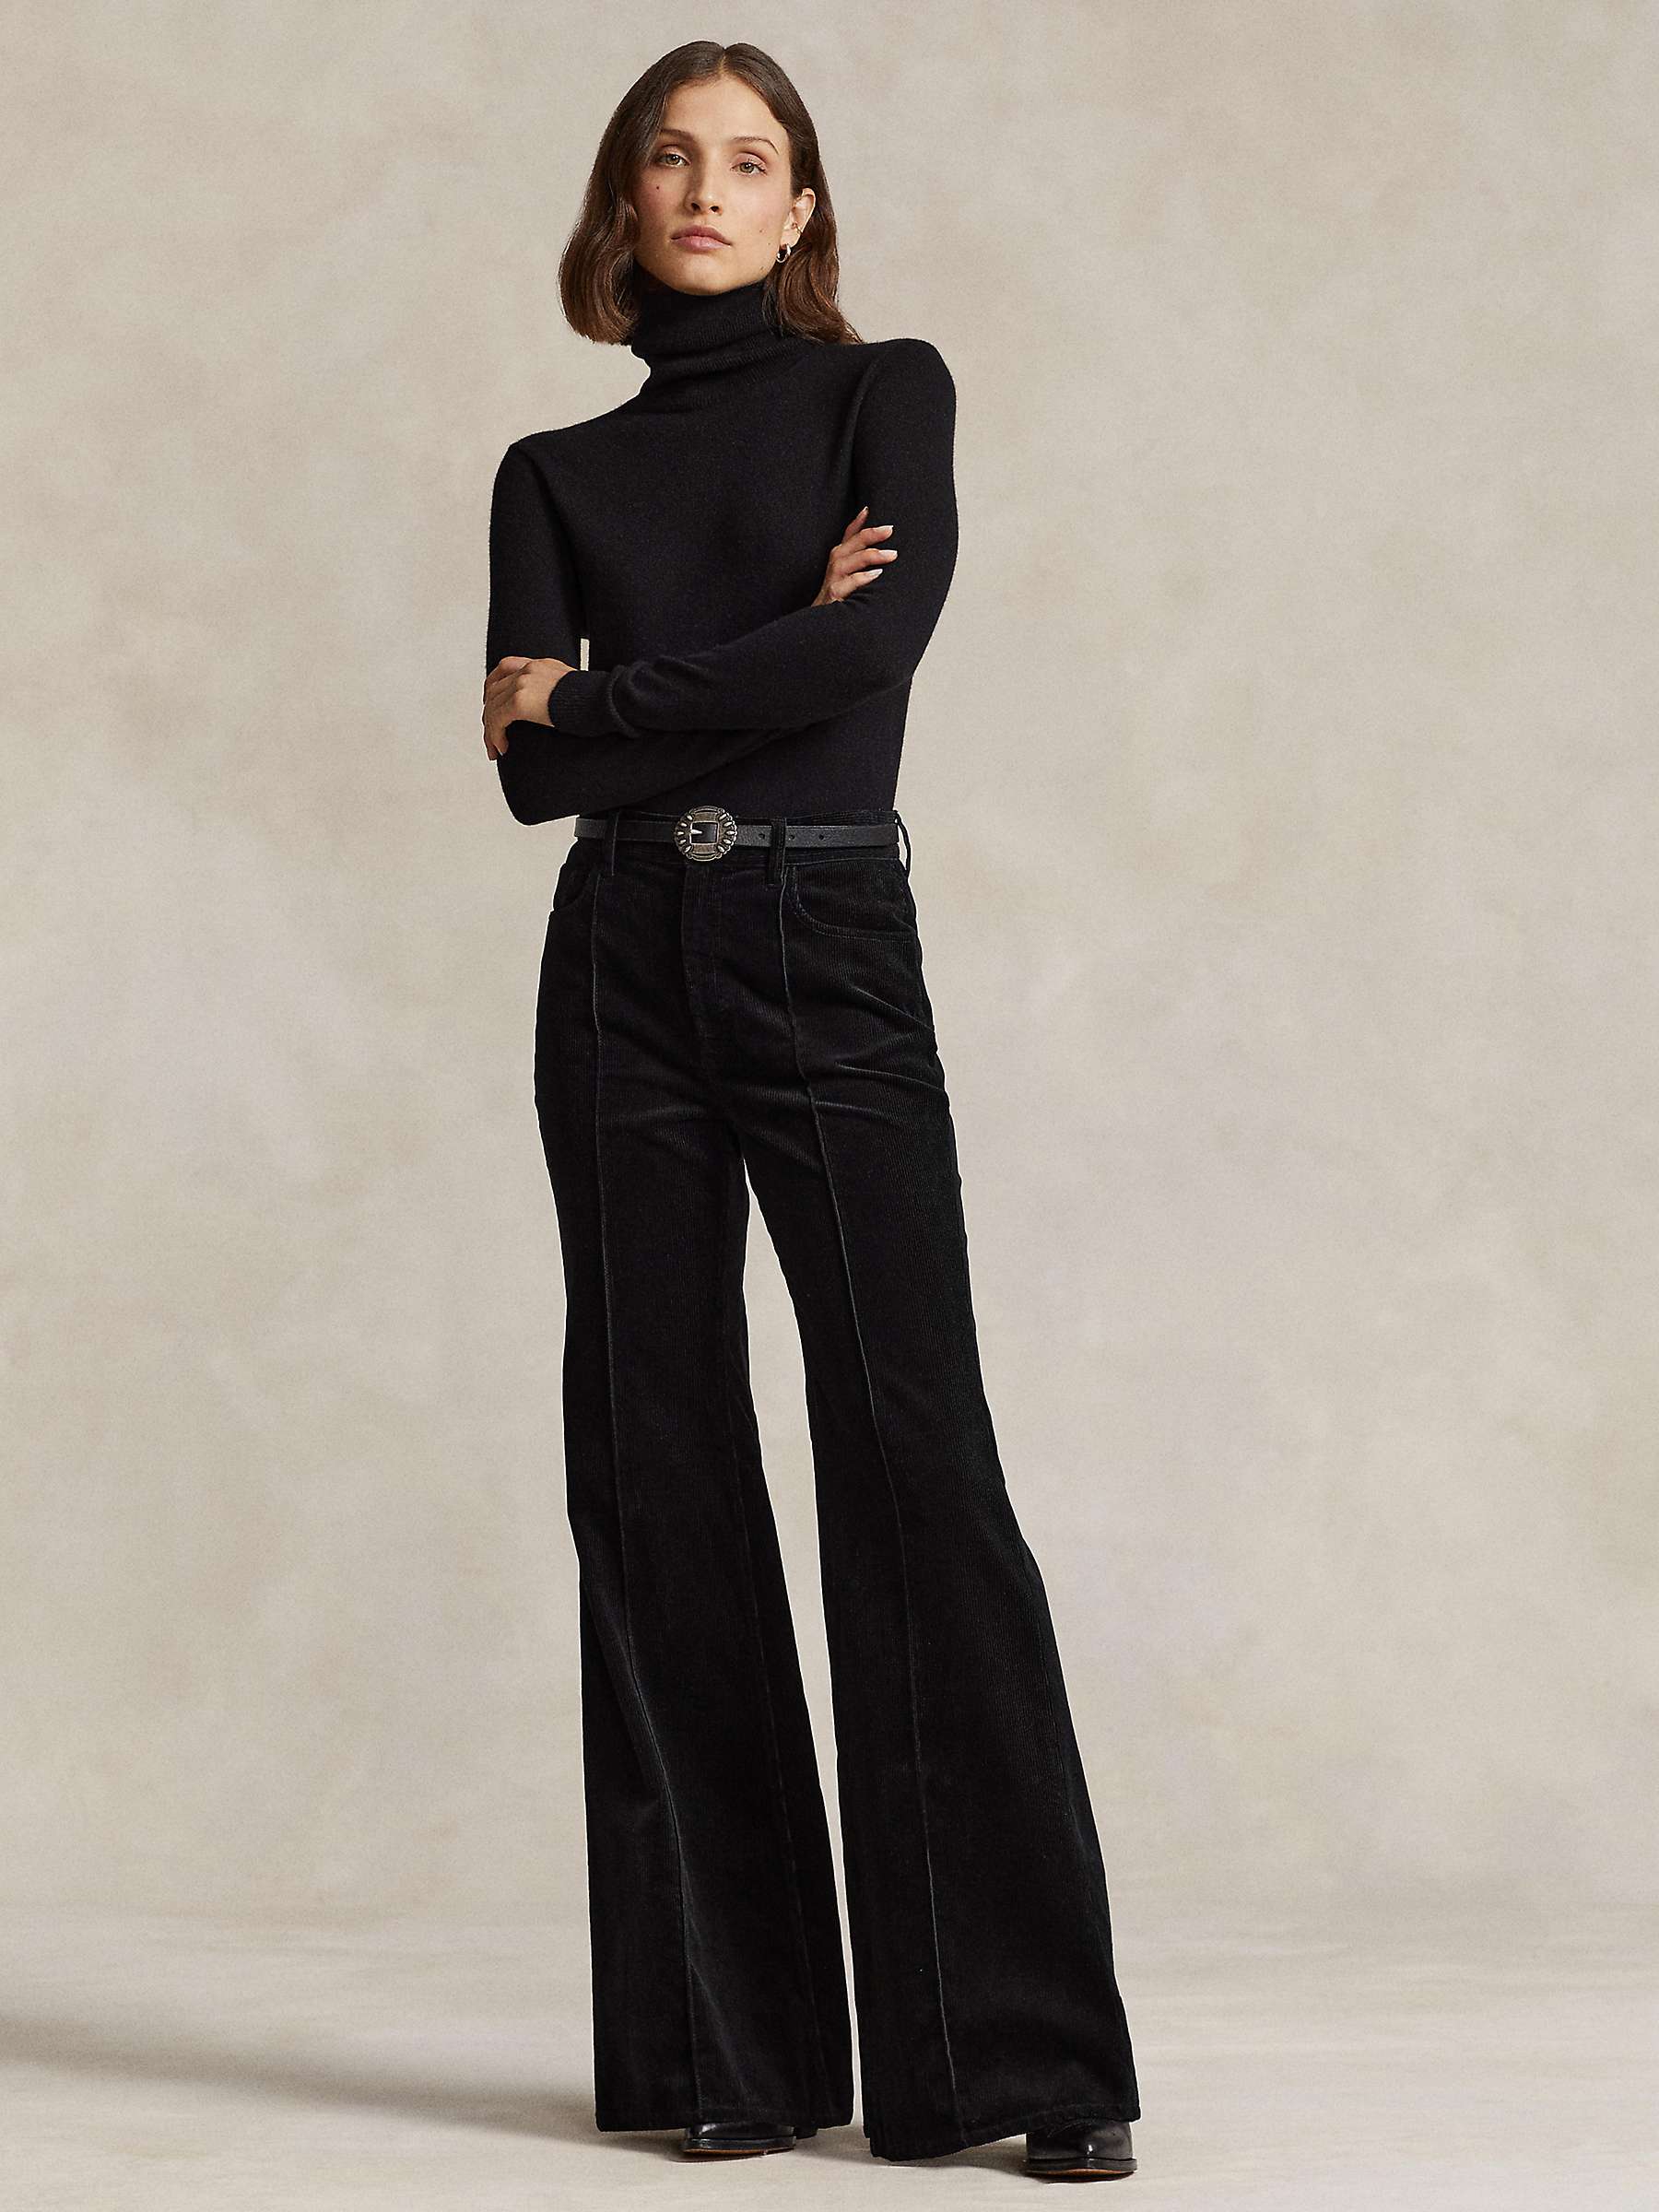 Buy Polo Ralph Lauren Pintucked Corduroy Flare Flat Front Trousers, Black Online at johnlewis.com